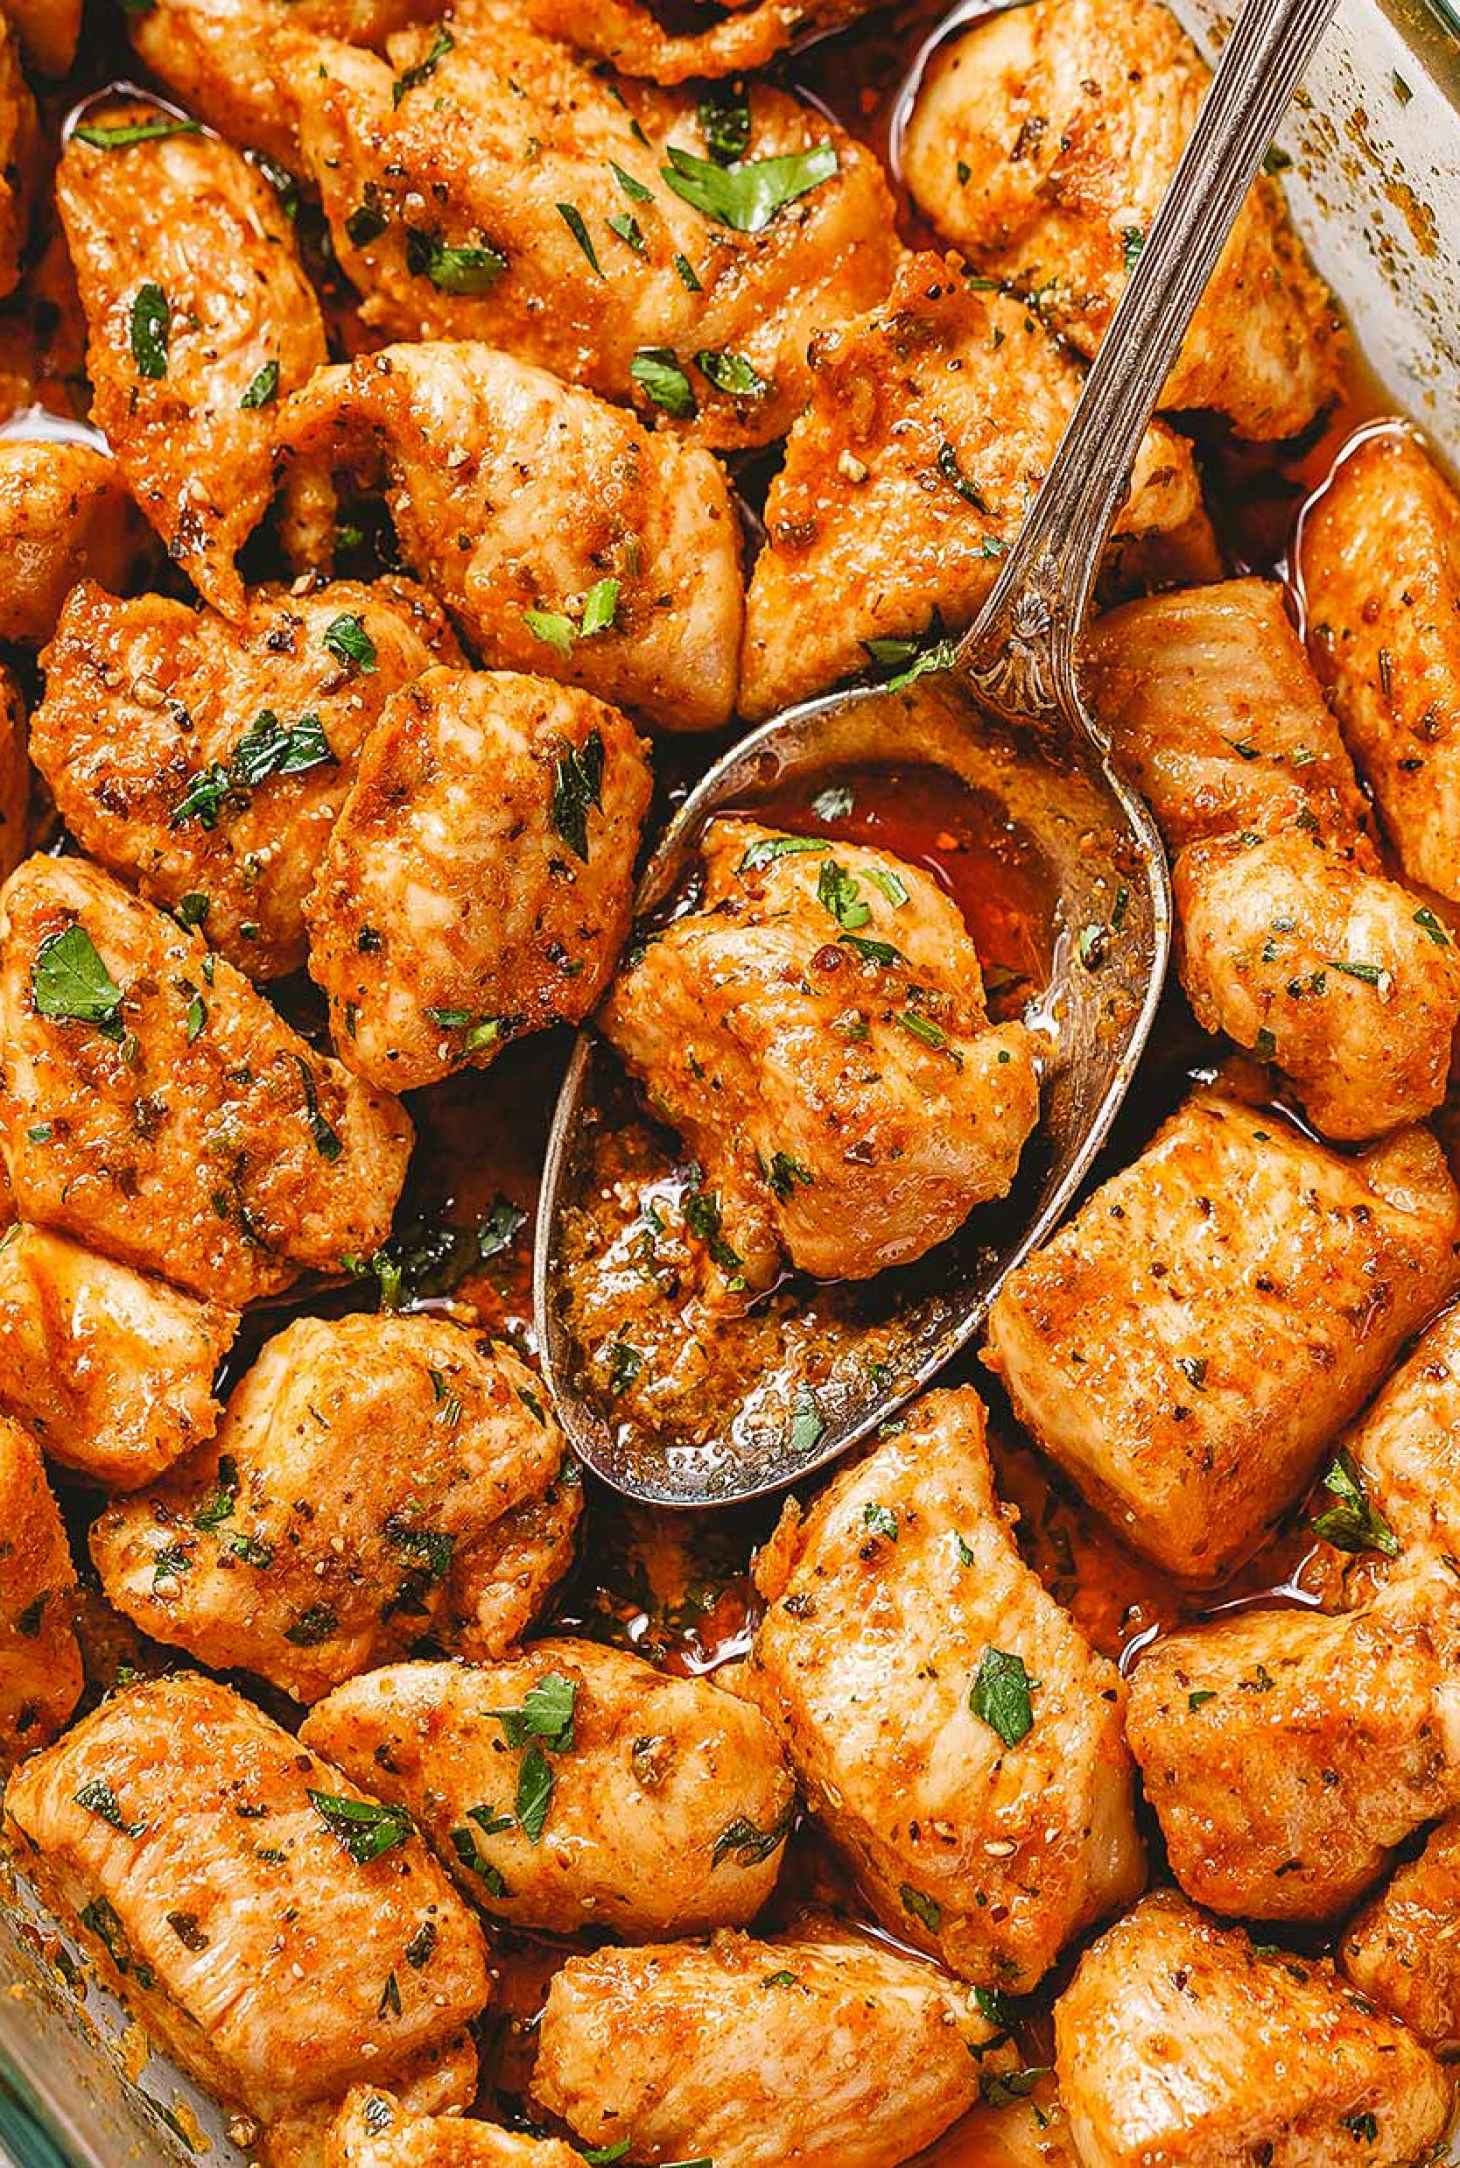 Oven Baked Chicken Bites - #recipe by #eatwell101 - https://www.eatwell101.com/oven-baked-chicken-bites-recipe